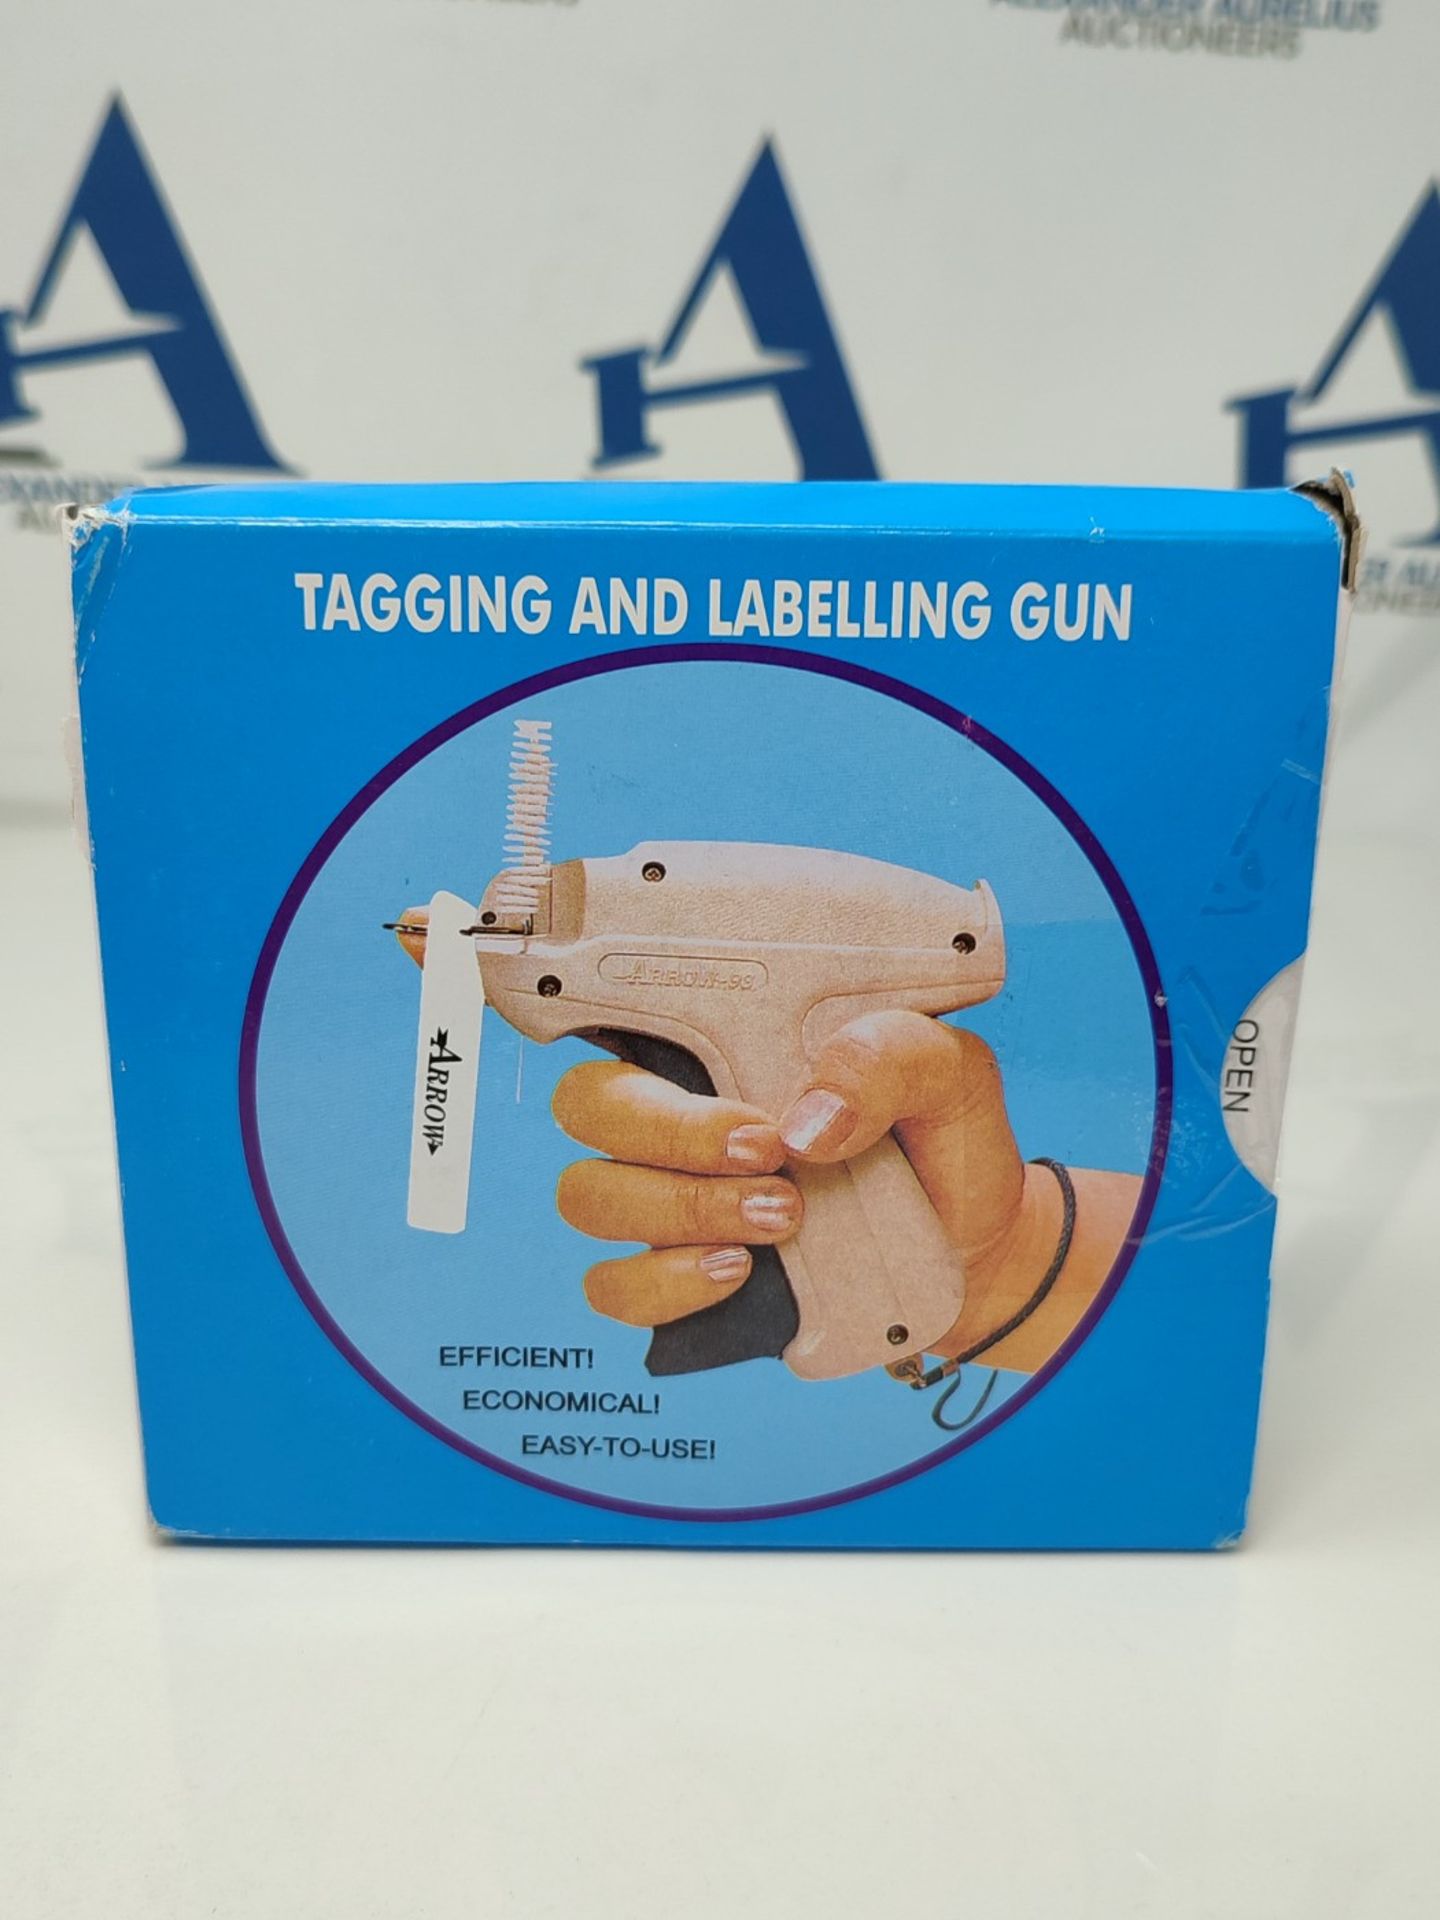 Arrow 9S Standard Tag Gun Labeling Pistol - Attaching labels & price tags in a set wit